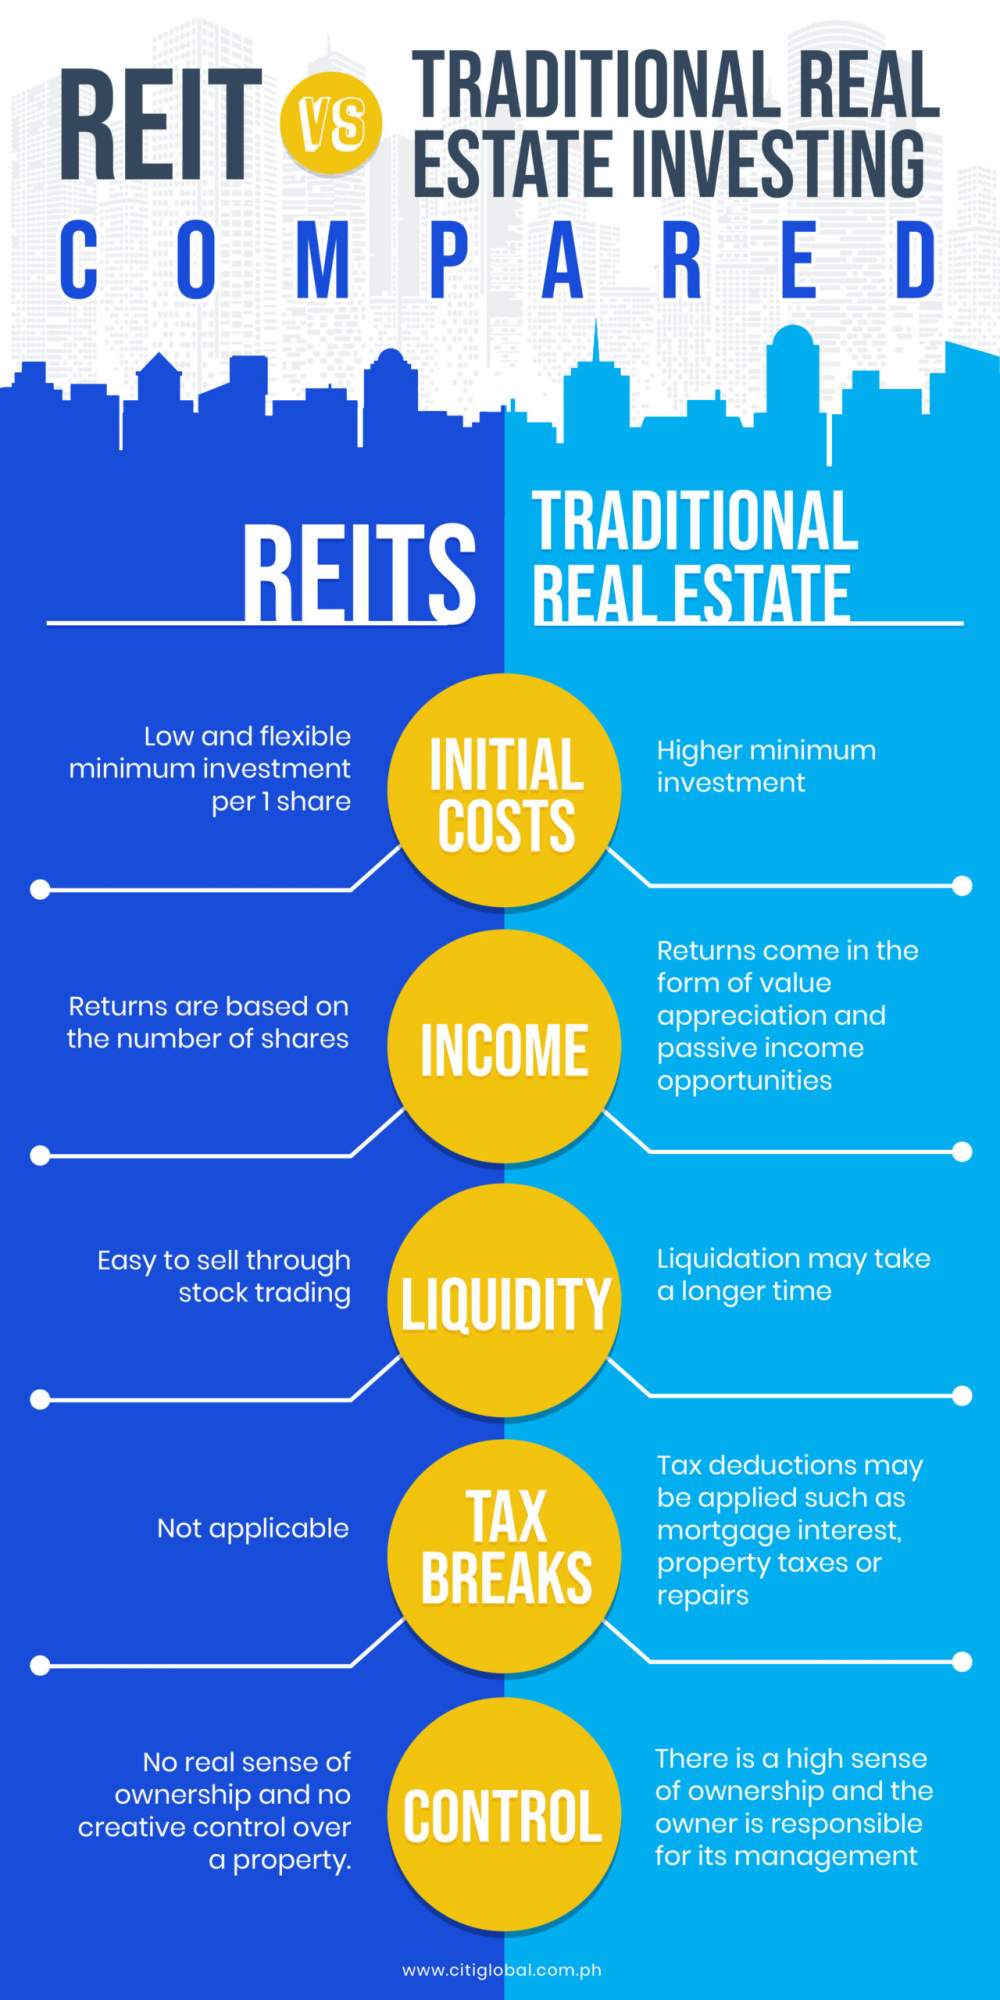 REIT Investment in the Philippines